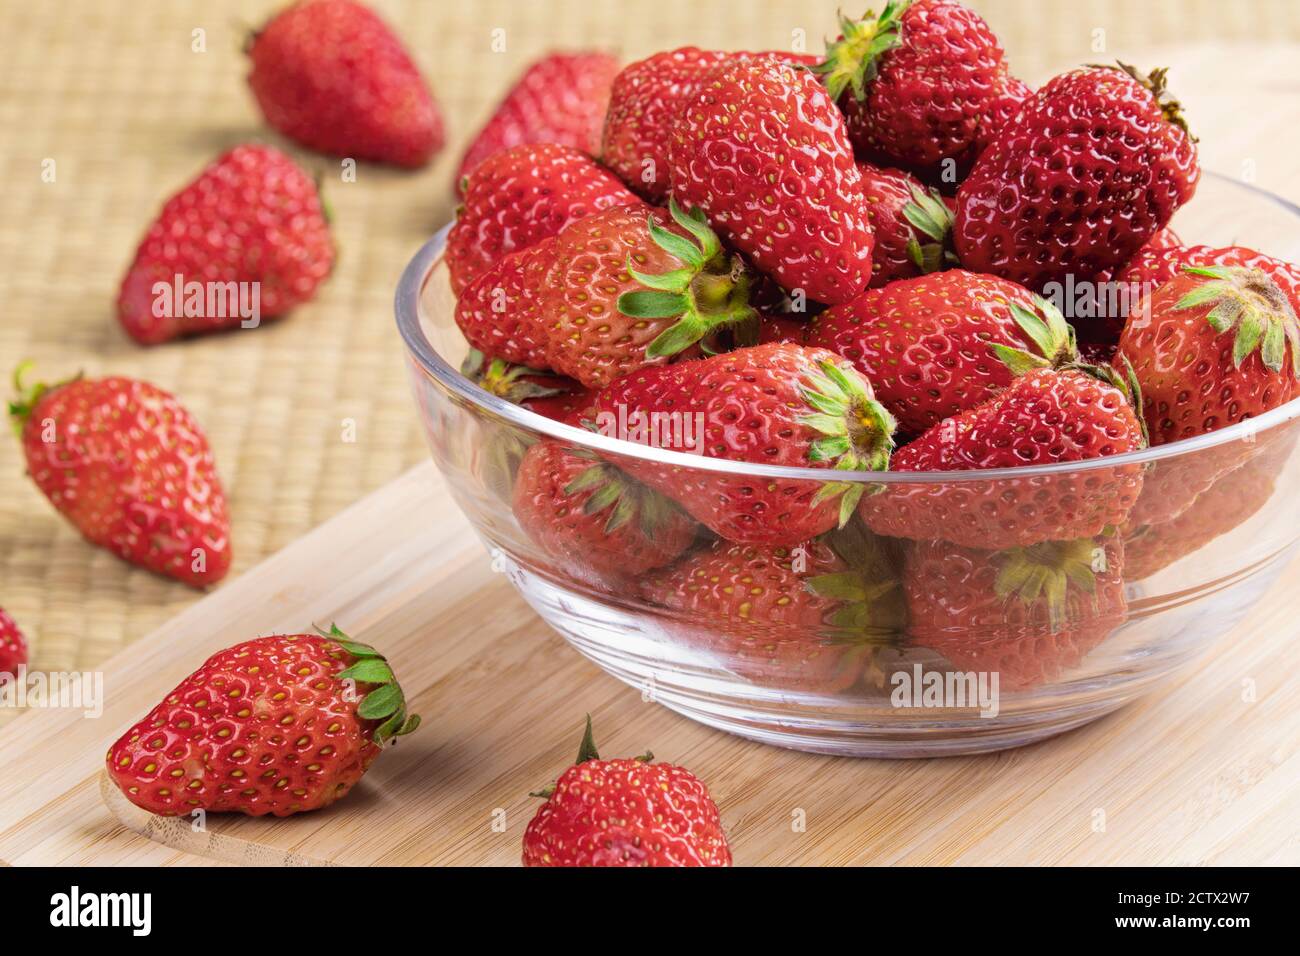 A glass bowl of delicious strawberries on a wooden background Stock Photo